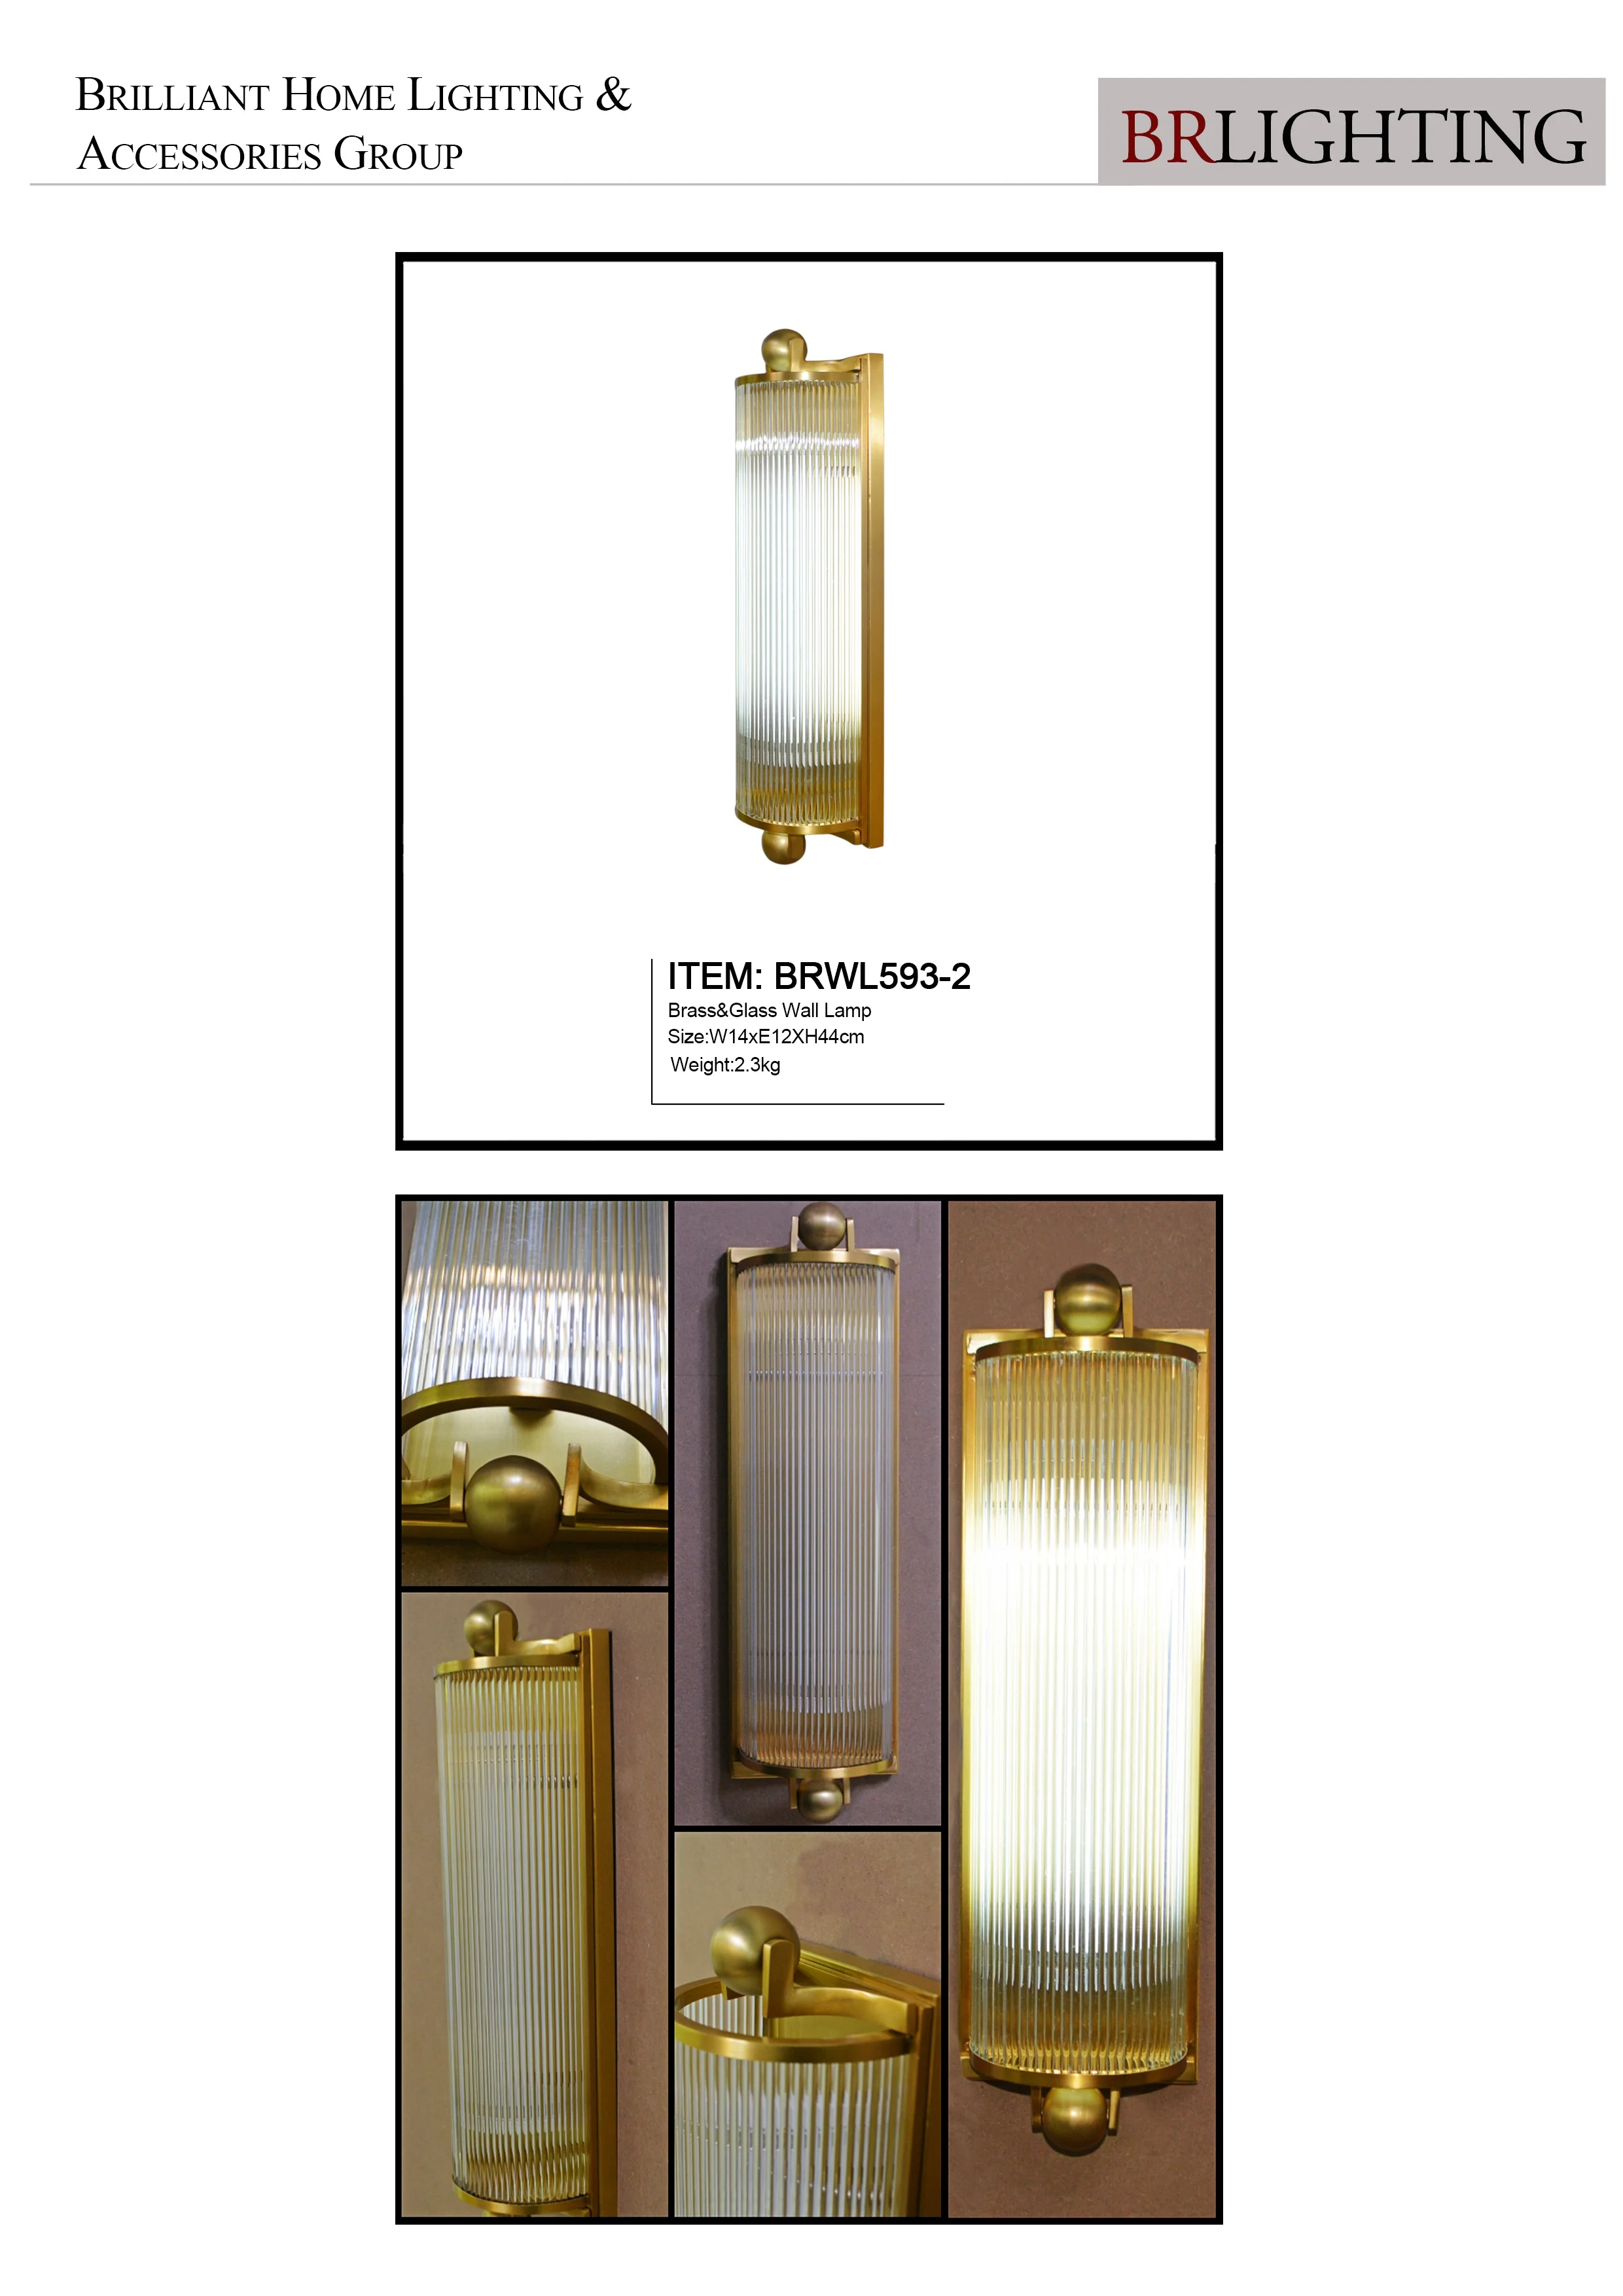 Energy Saving Hot Sell Modern Lighting Lamps Gold Style Indoor Brass Glass Tube Wall Lamps